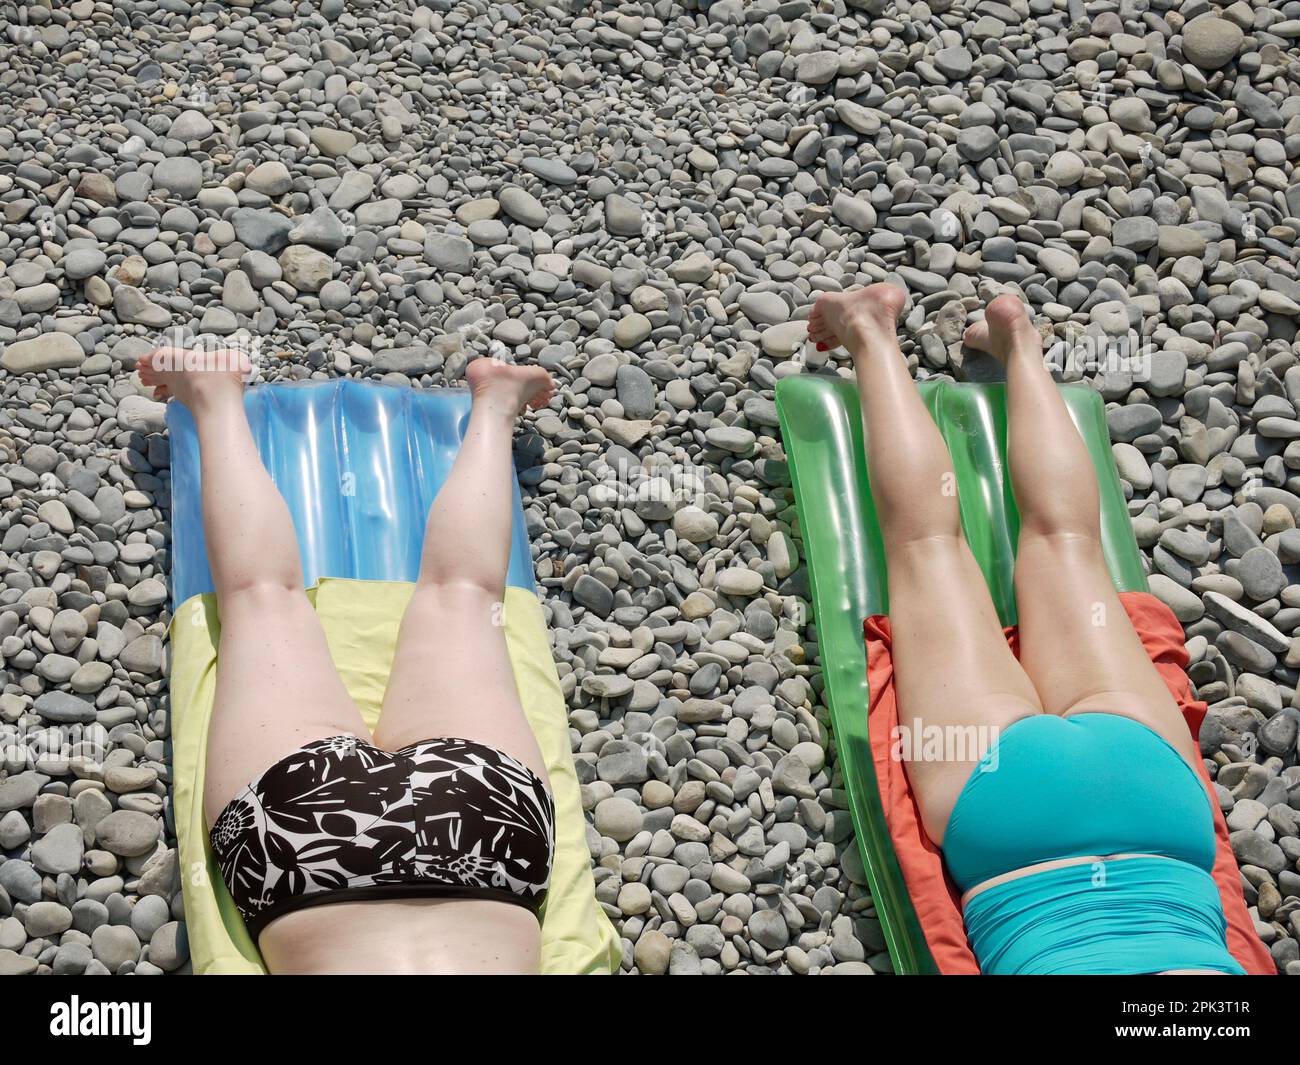 two women sunbathe on colorful inflatable mattresses Stock Photo